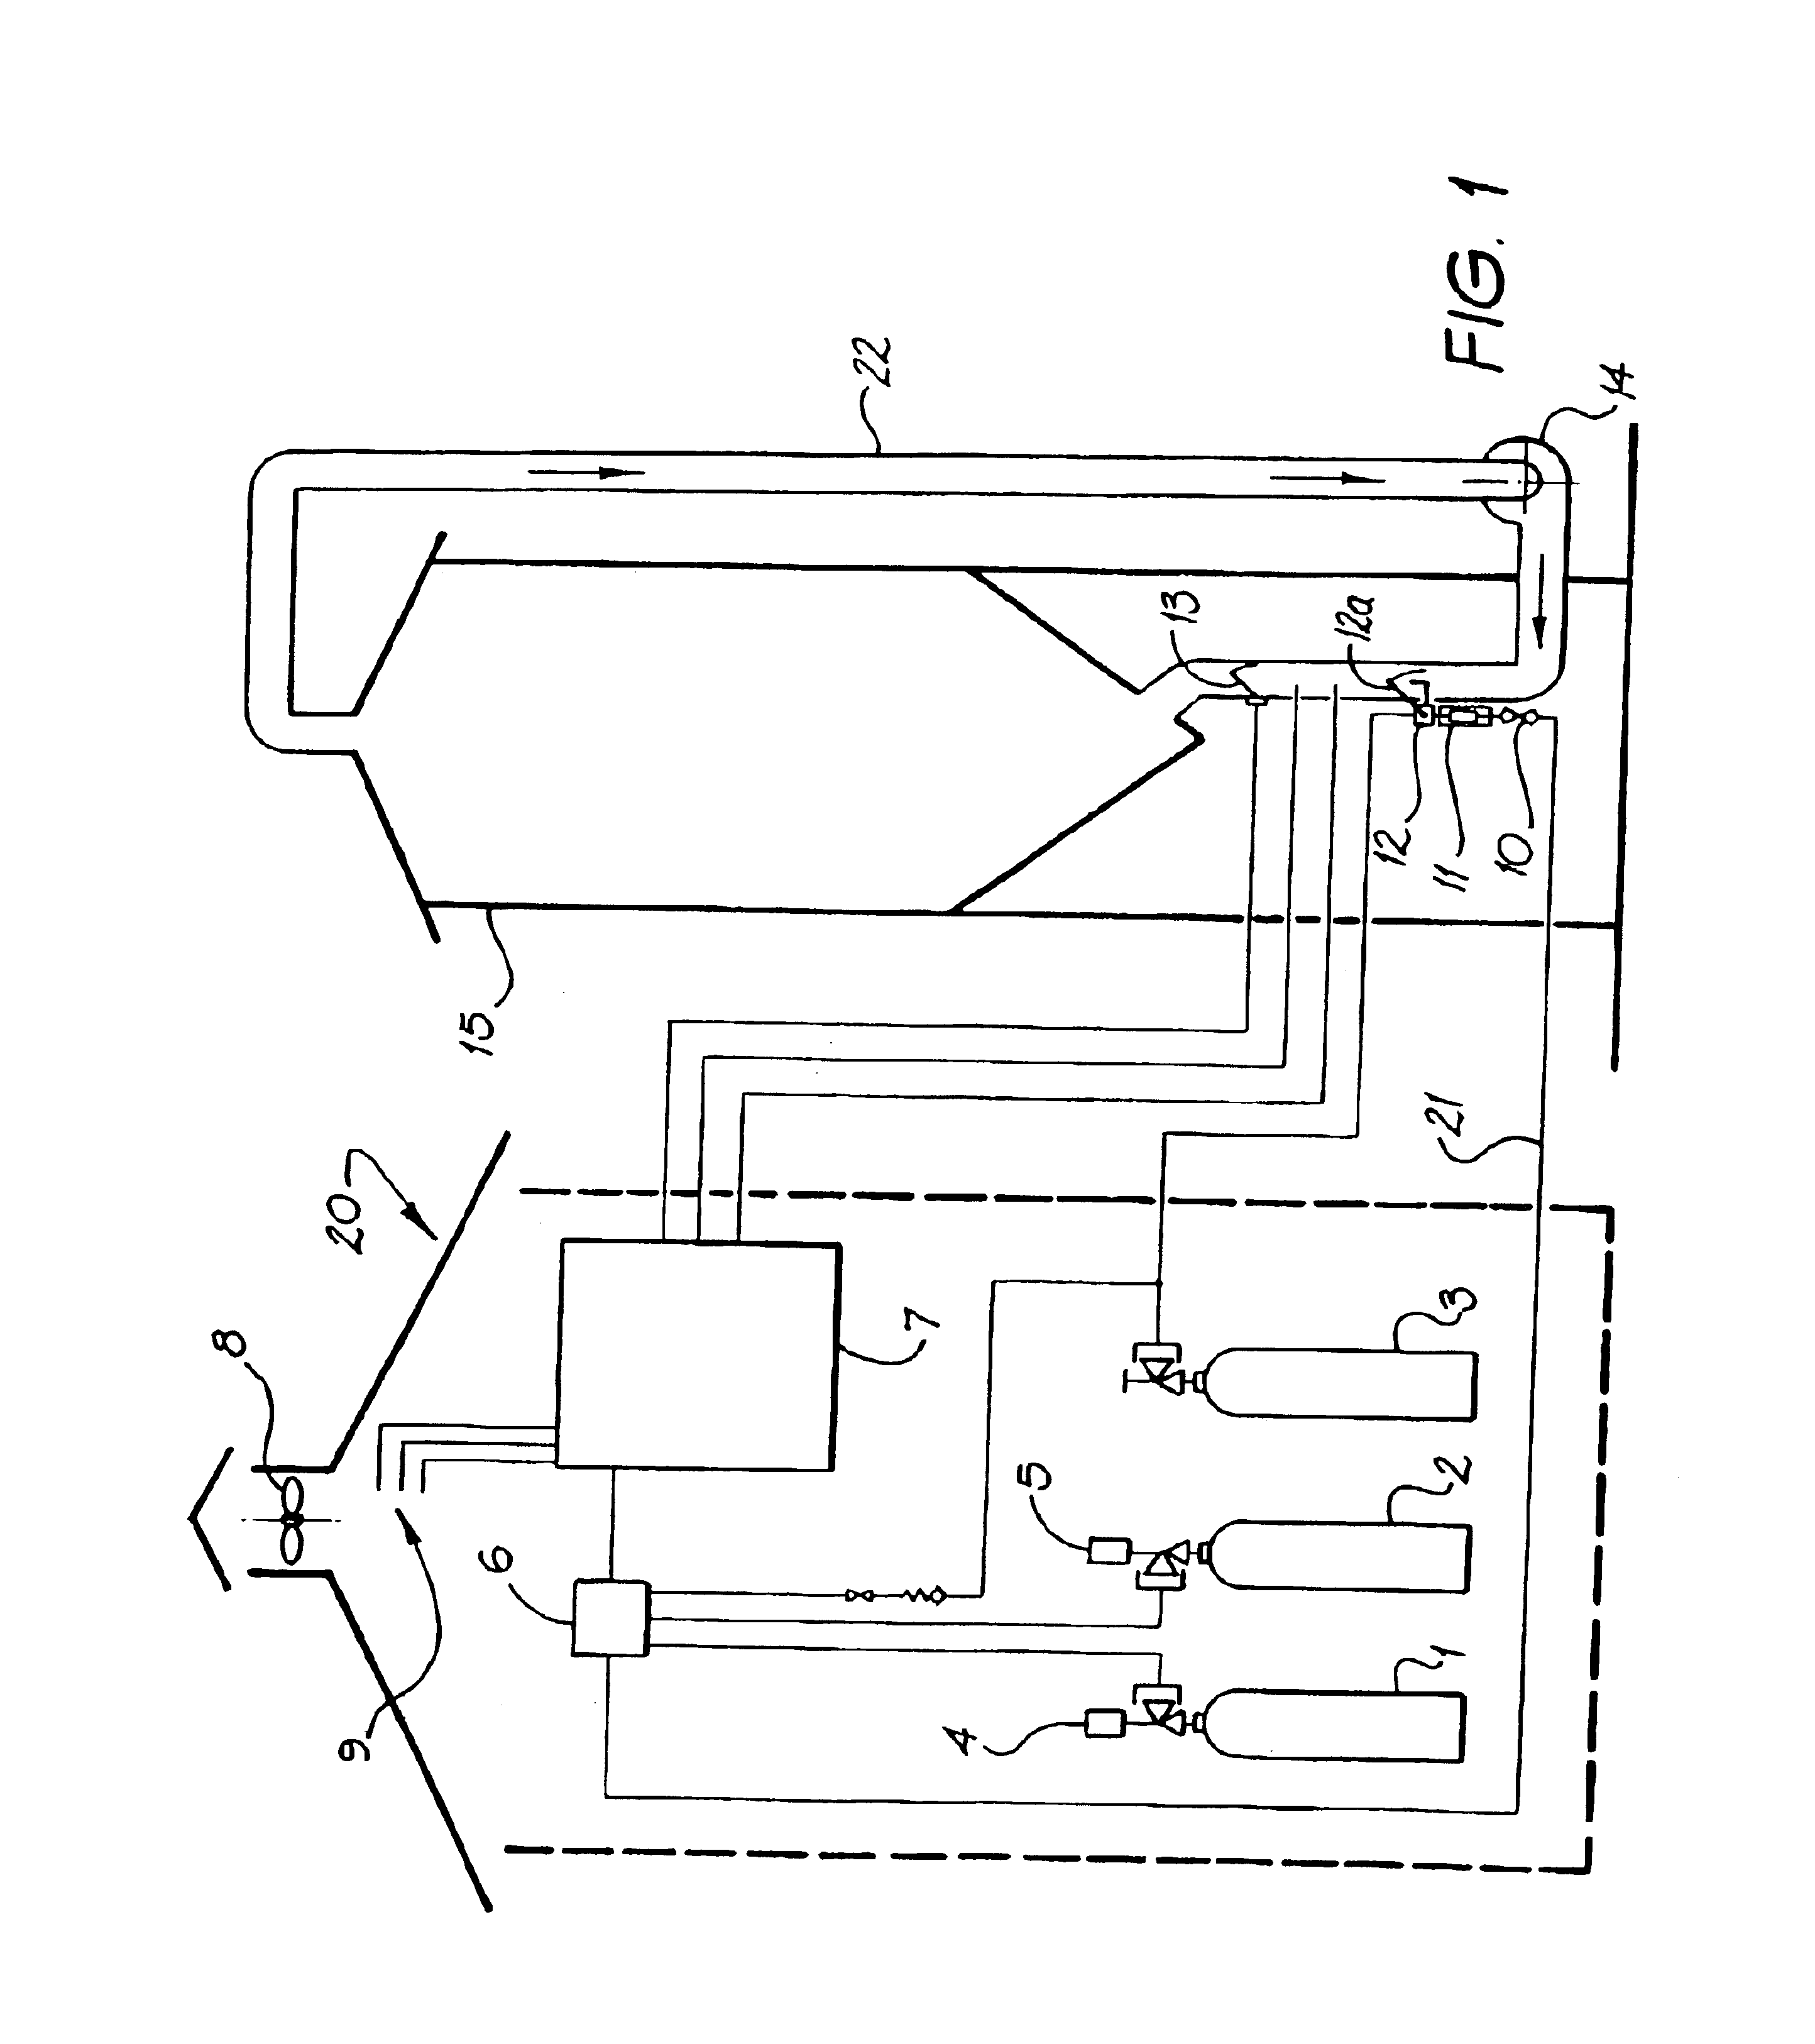 Process and apparatus for supplying a gaseous mixture